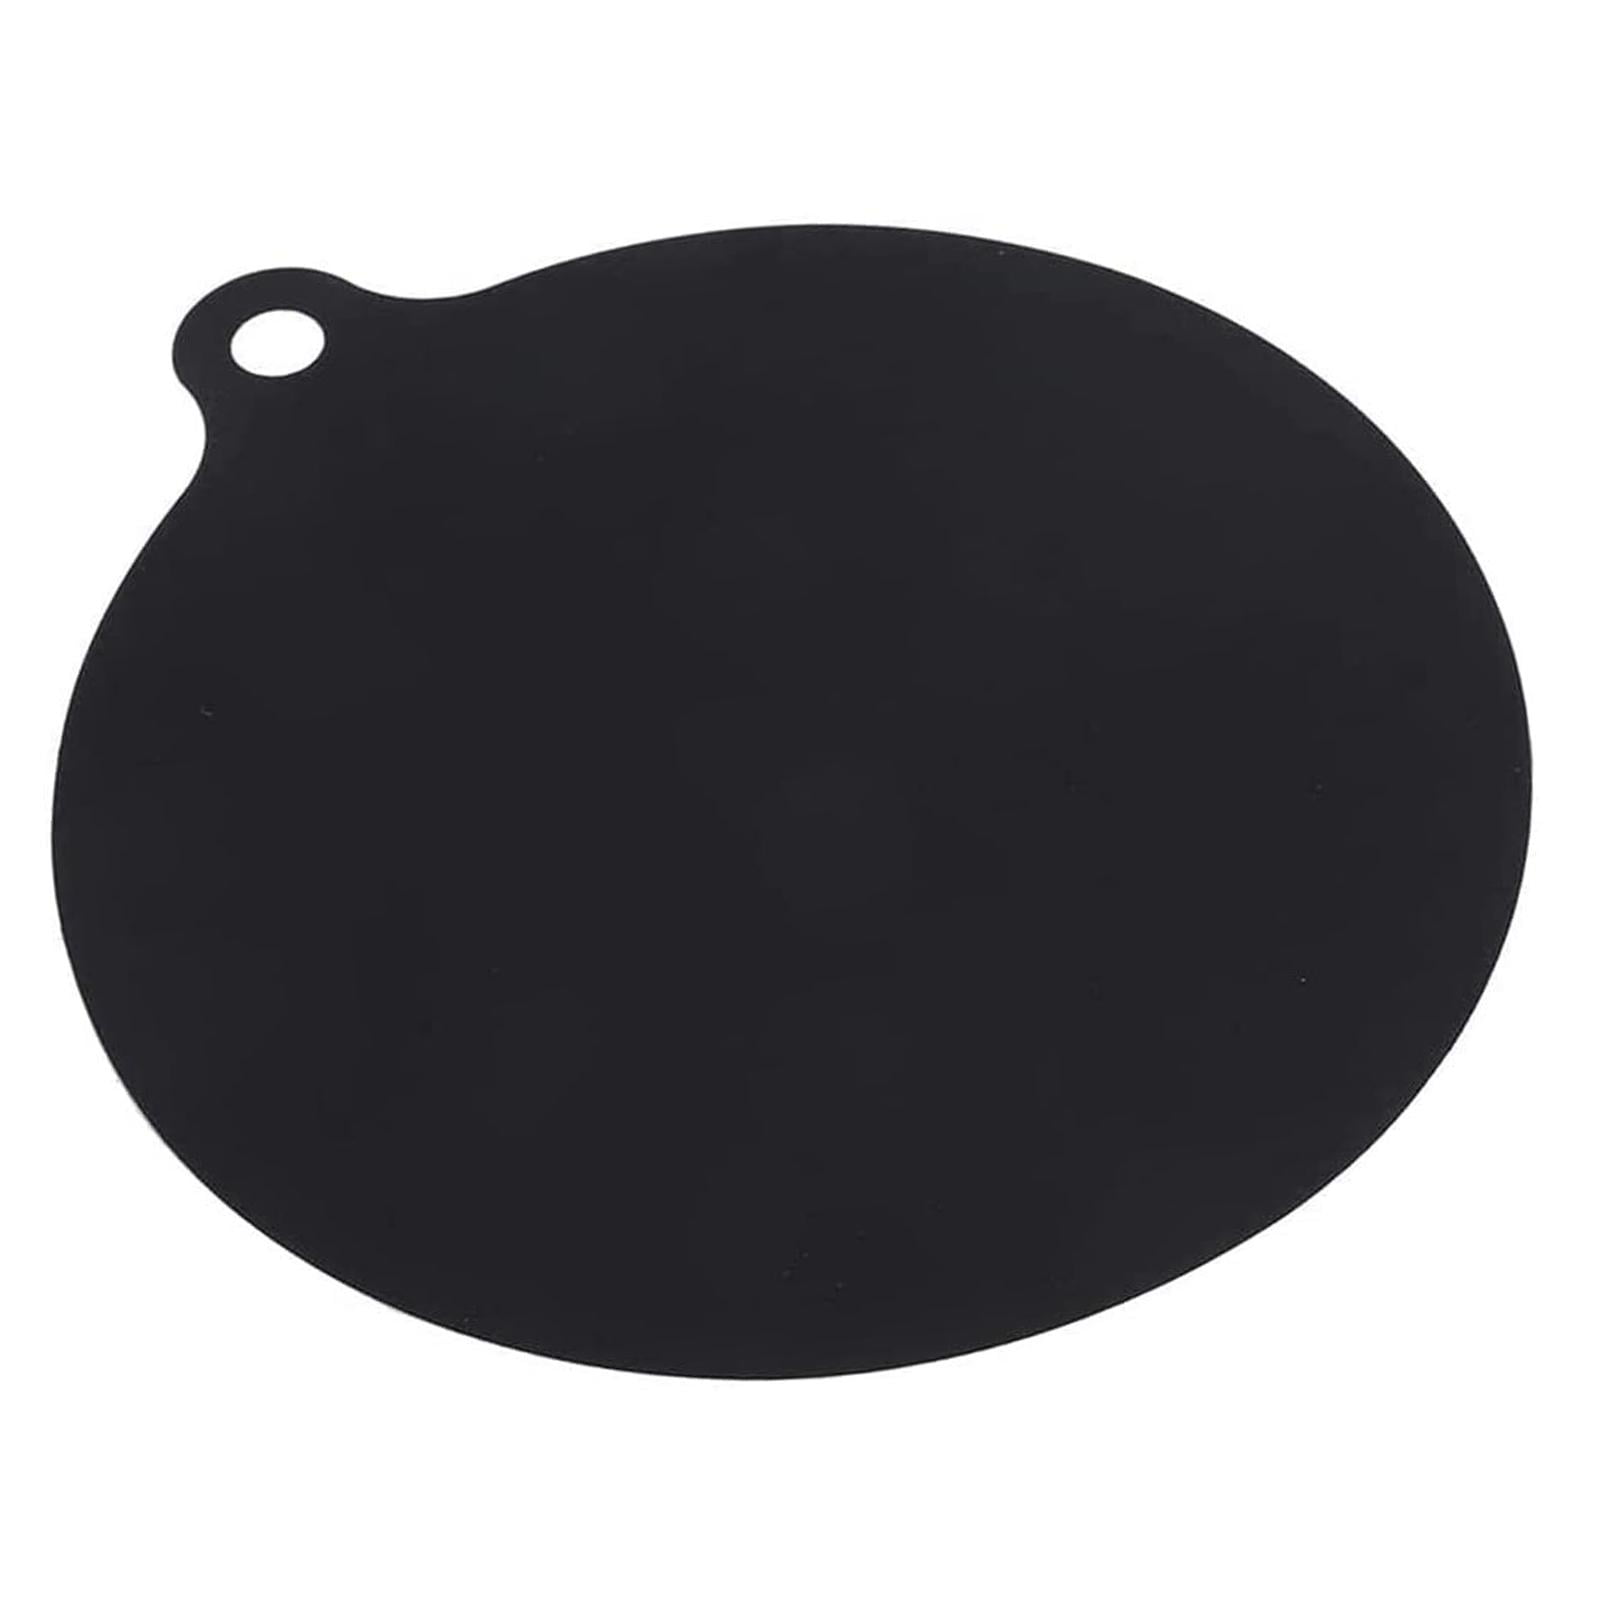 Induction Cooktop Mat 8.66 Inch Insulated Silicone Mat for